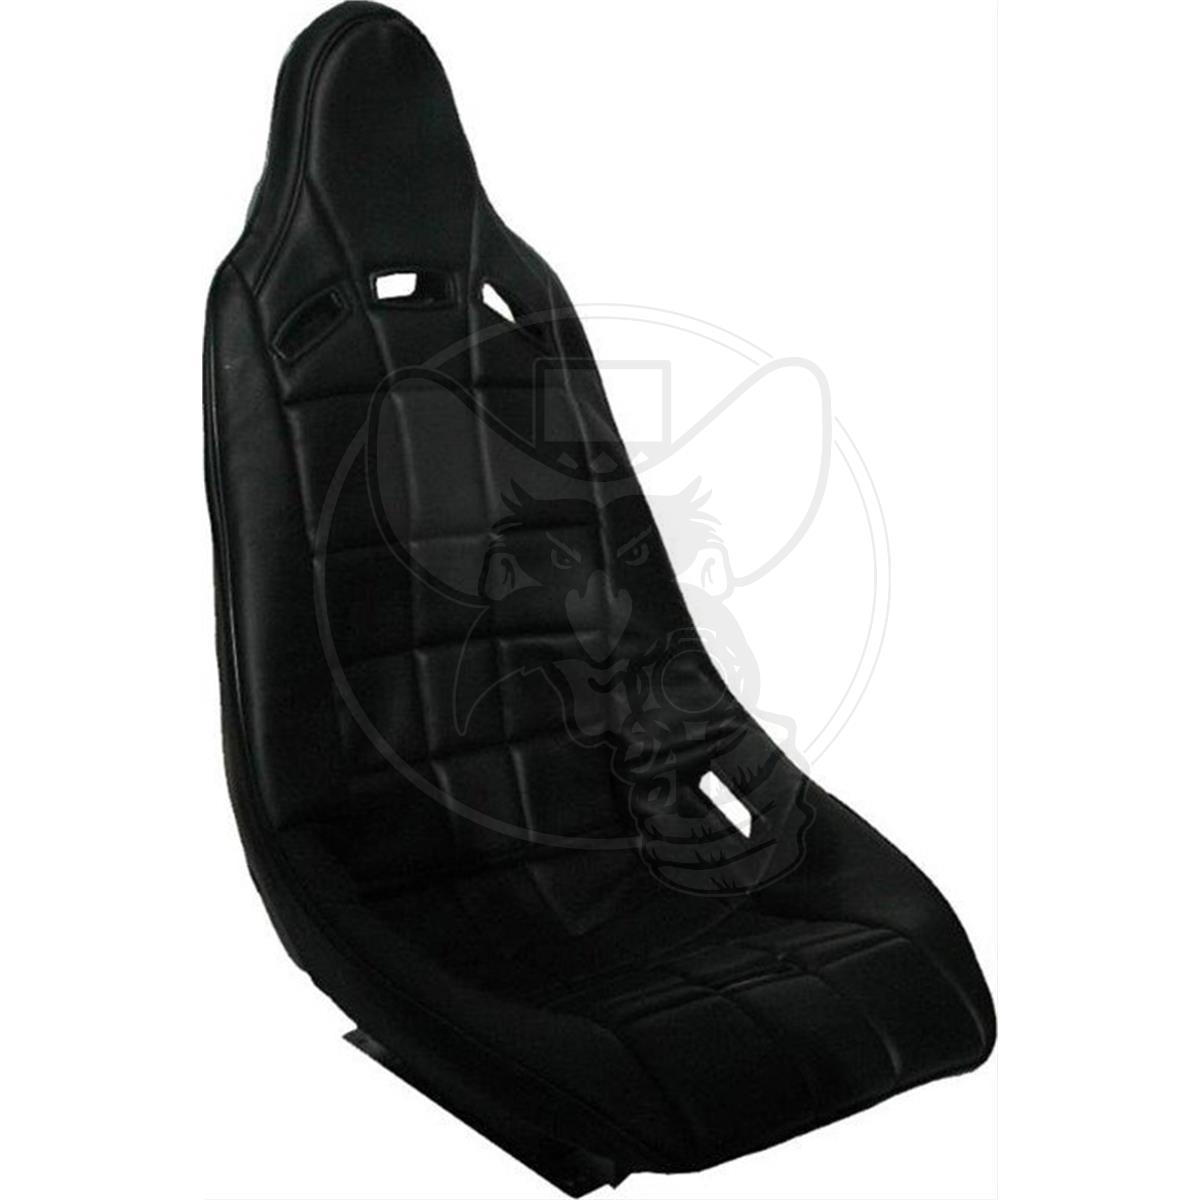 RCI SEAT COVER FOR HI BACK RCI8000S POLY SEAT - BLACK